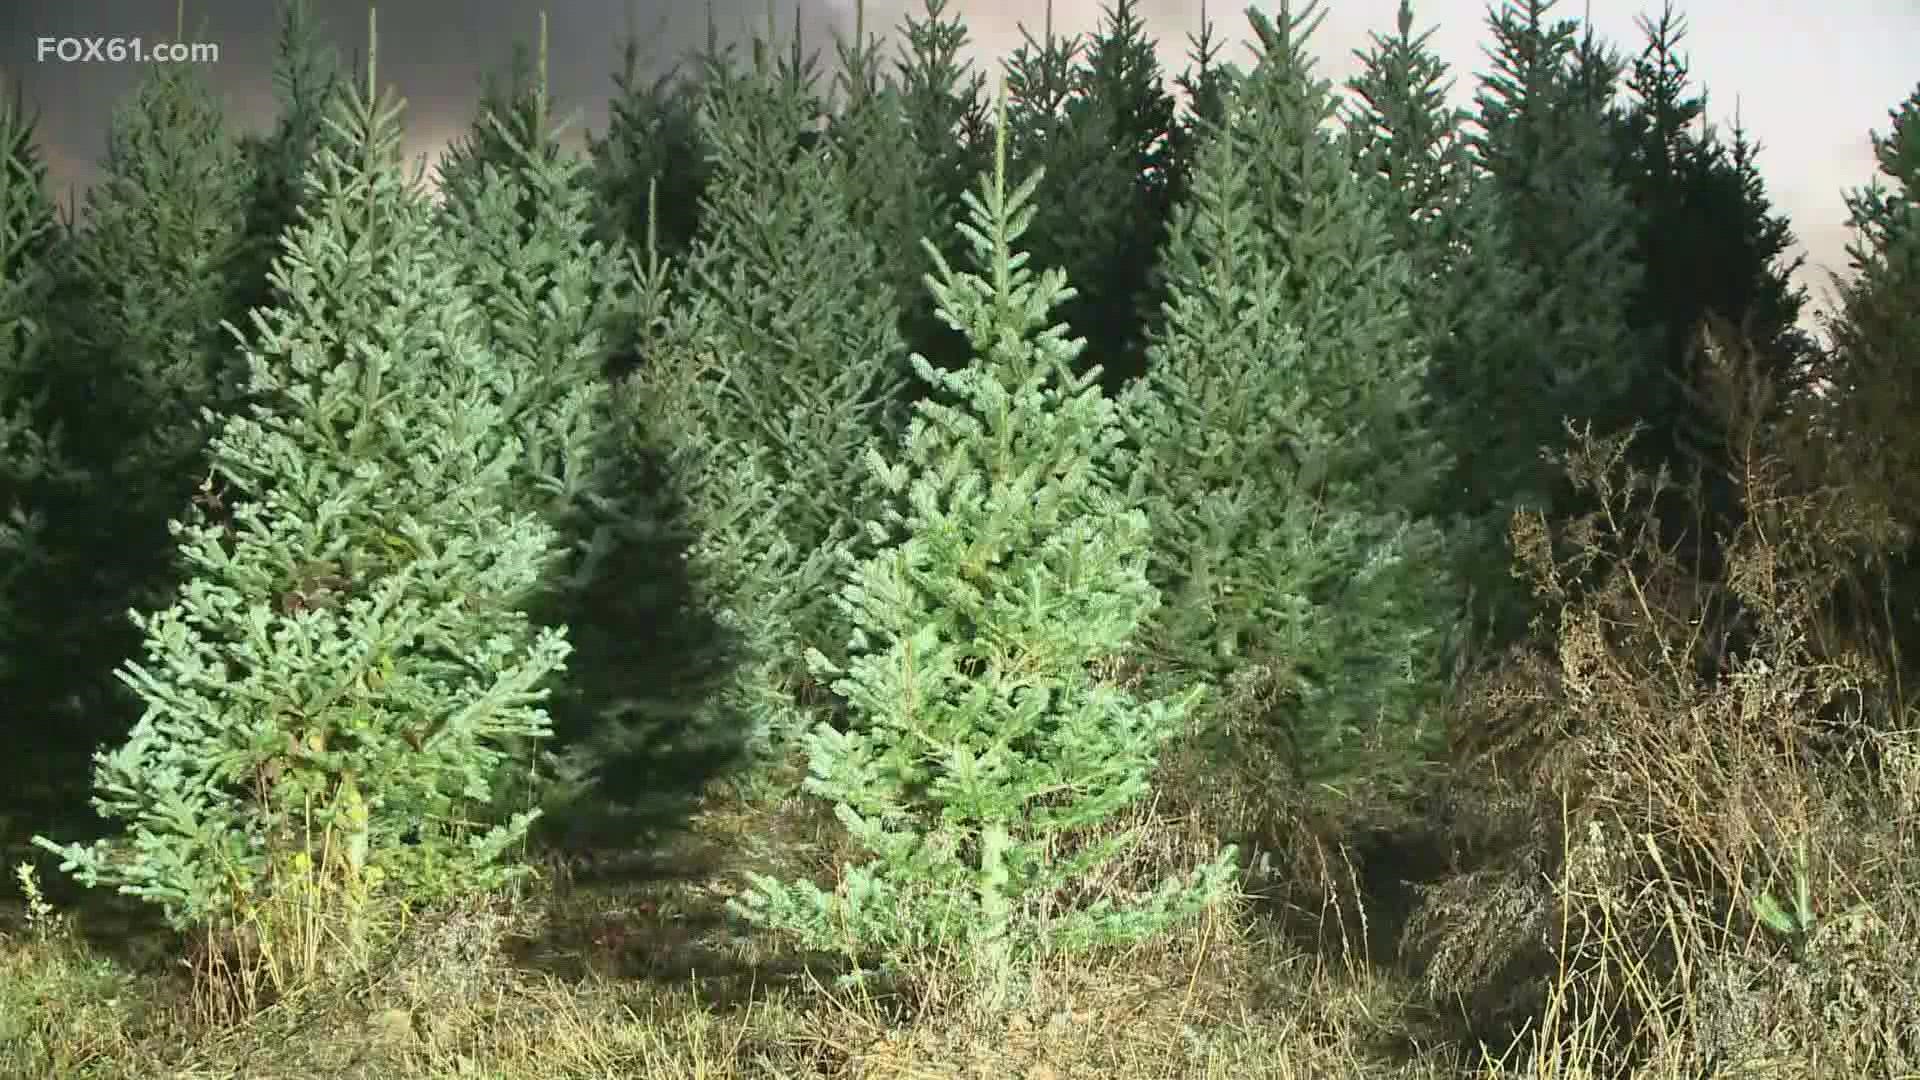 Sellers say they are losing trees by the hundreds due to a supply issue coming out of Canada.